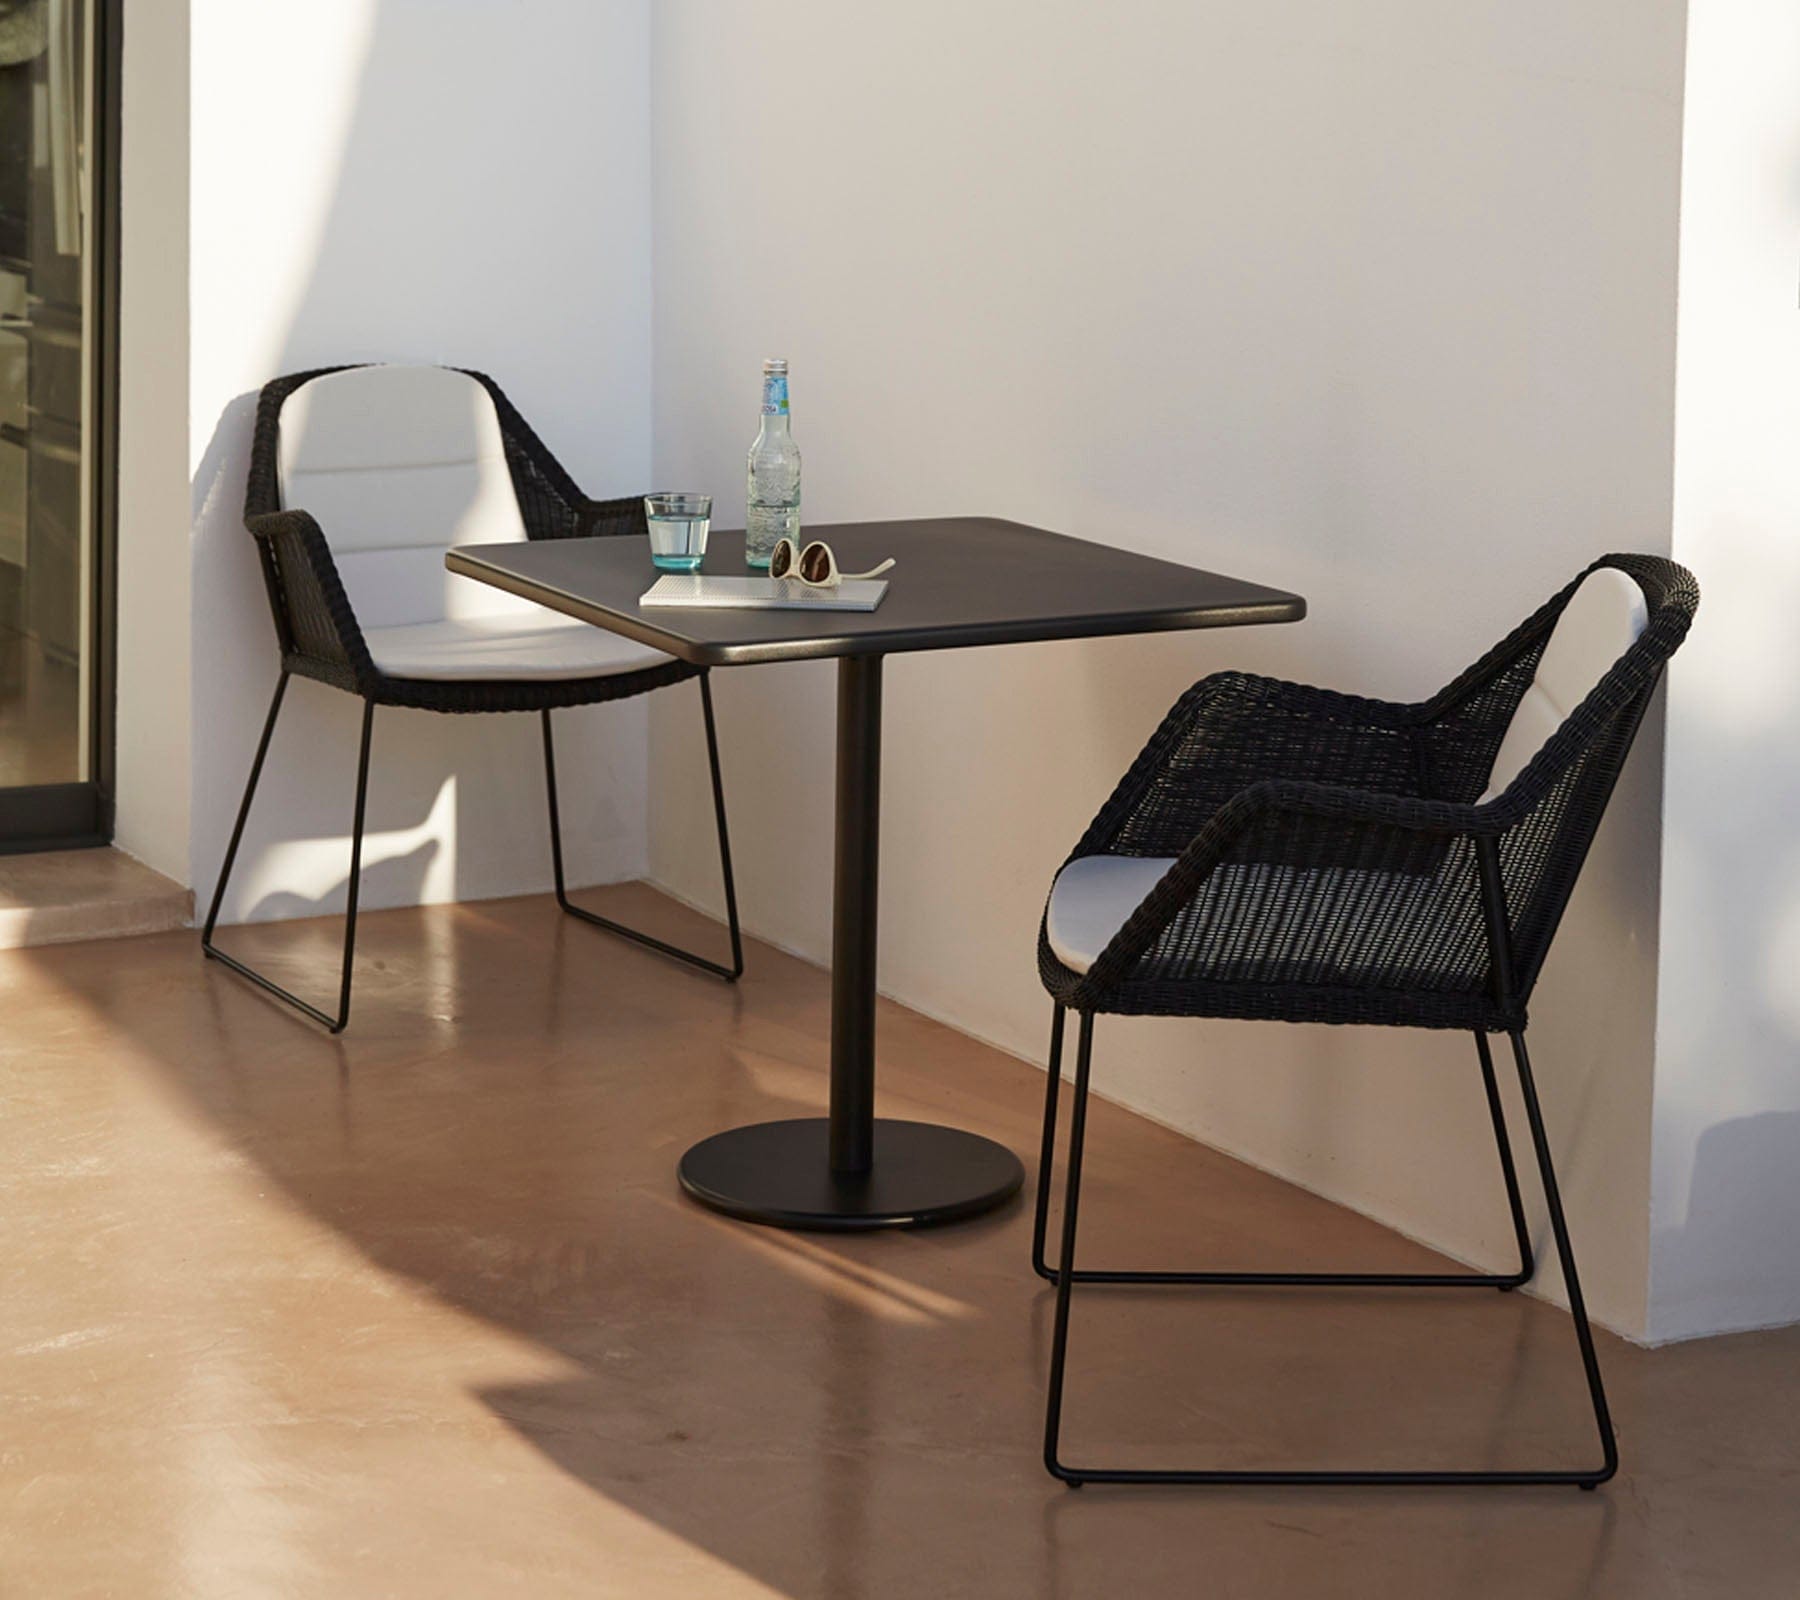 Boxhill's Breeze Dining Weave Chair Black lifestyle image with square table